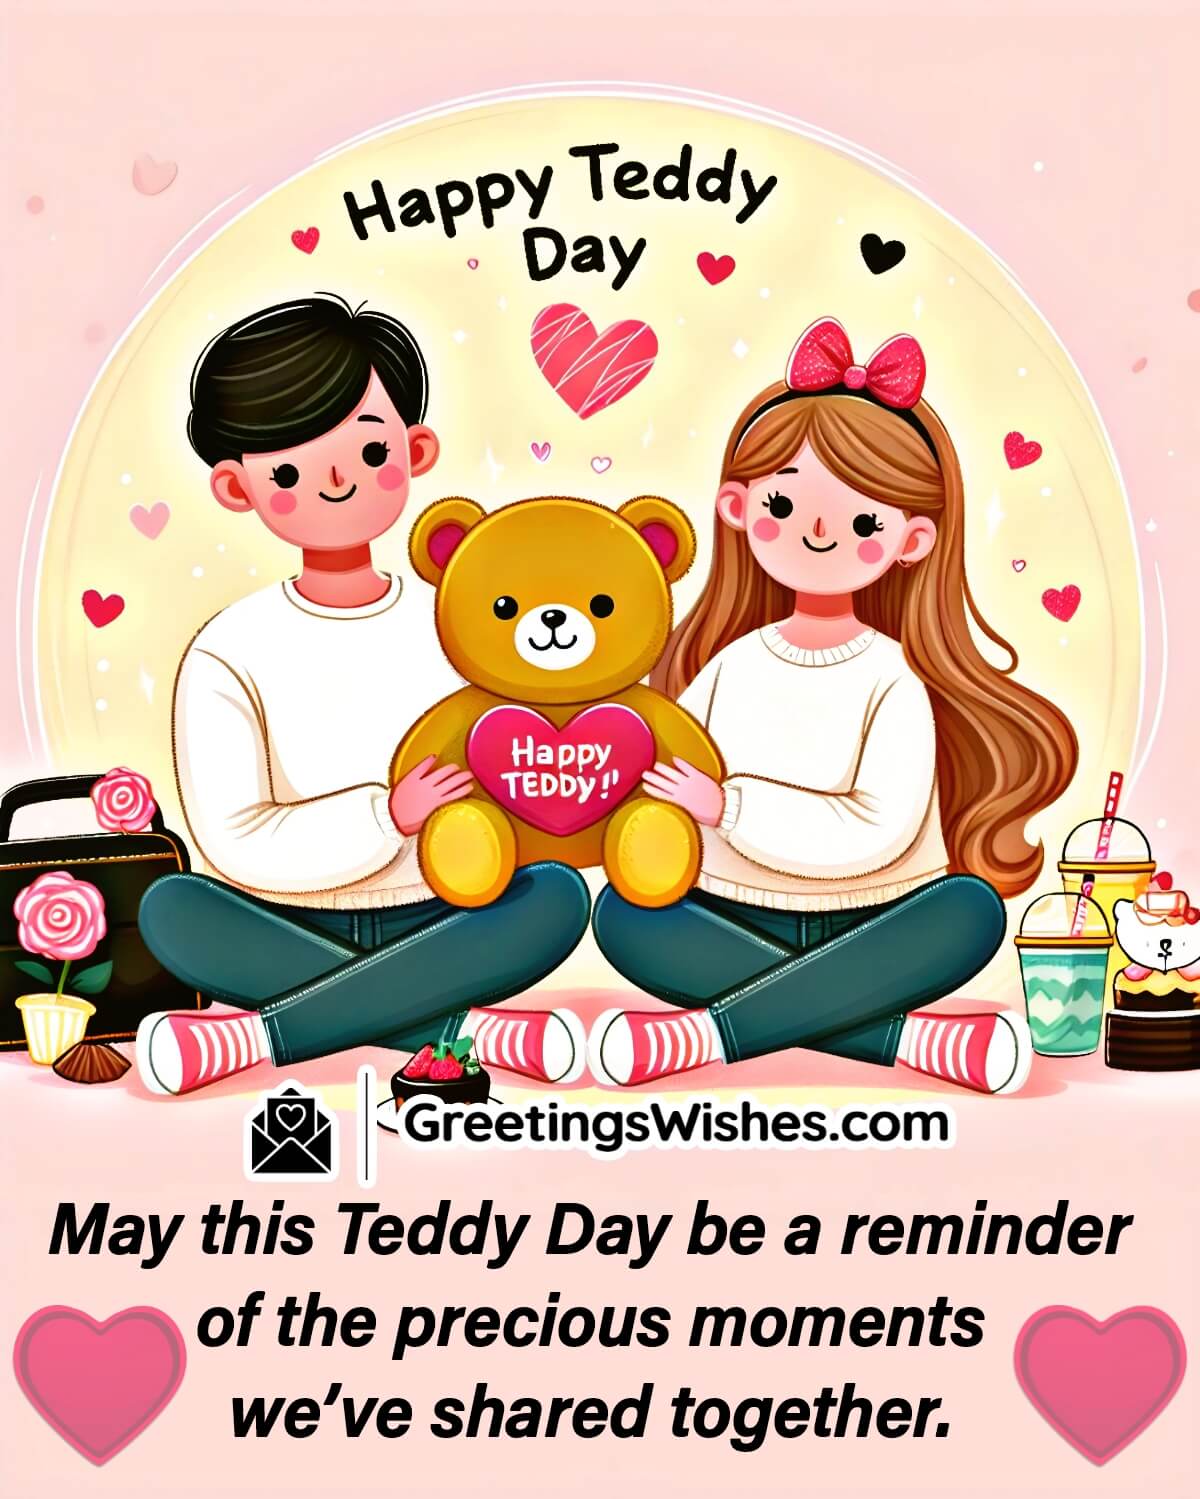 Happy Teddy Day Message Image